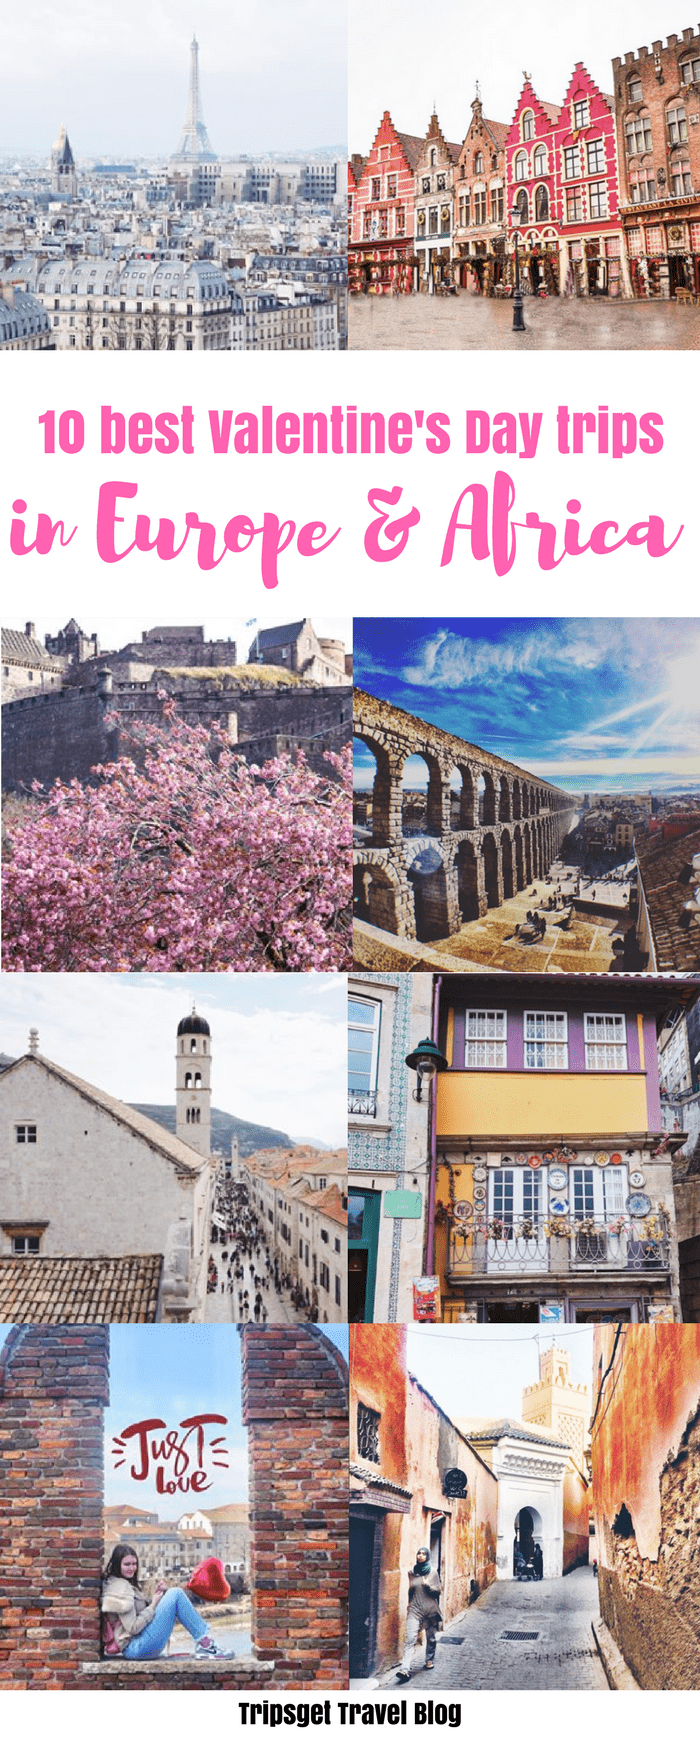 10 best travel ideas for a Valentine's day trip! Valentines trip idea in Europe and Africa #ValentinesDay